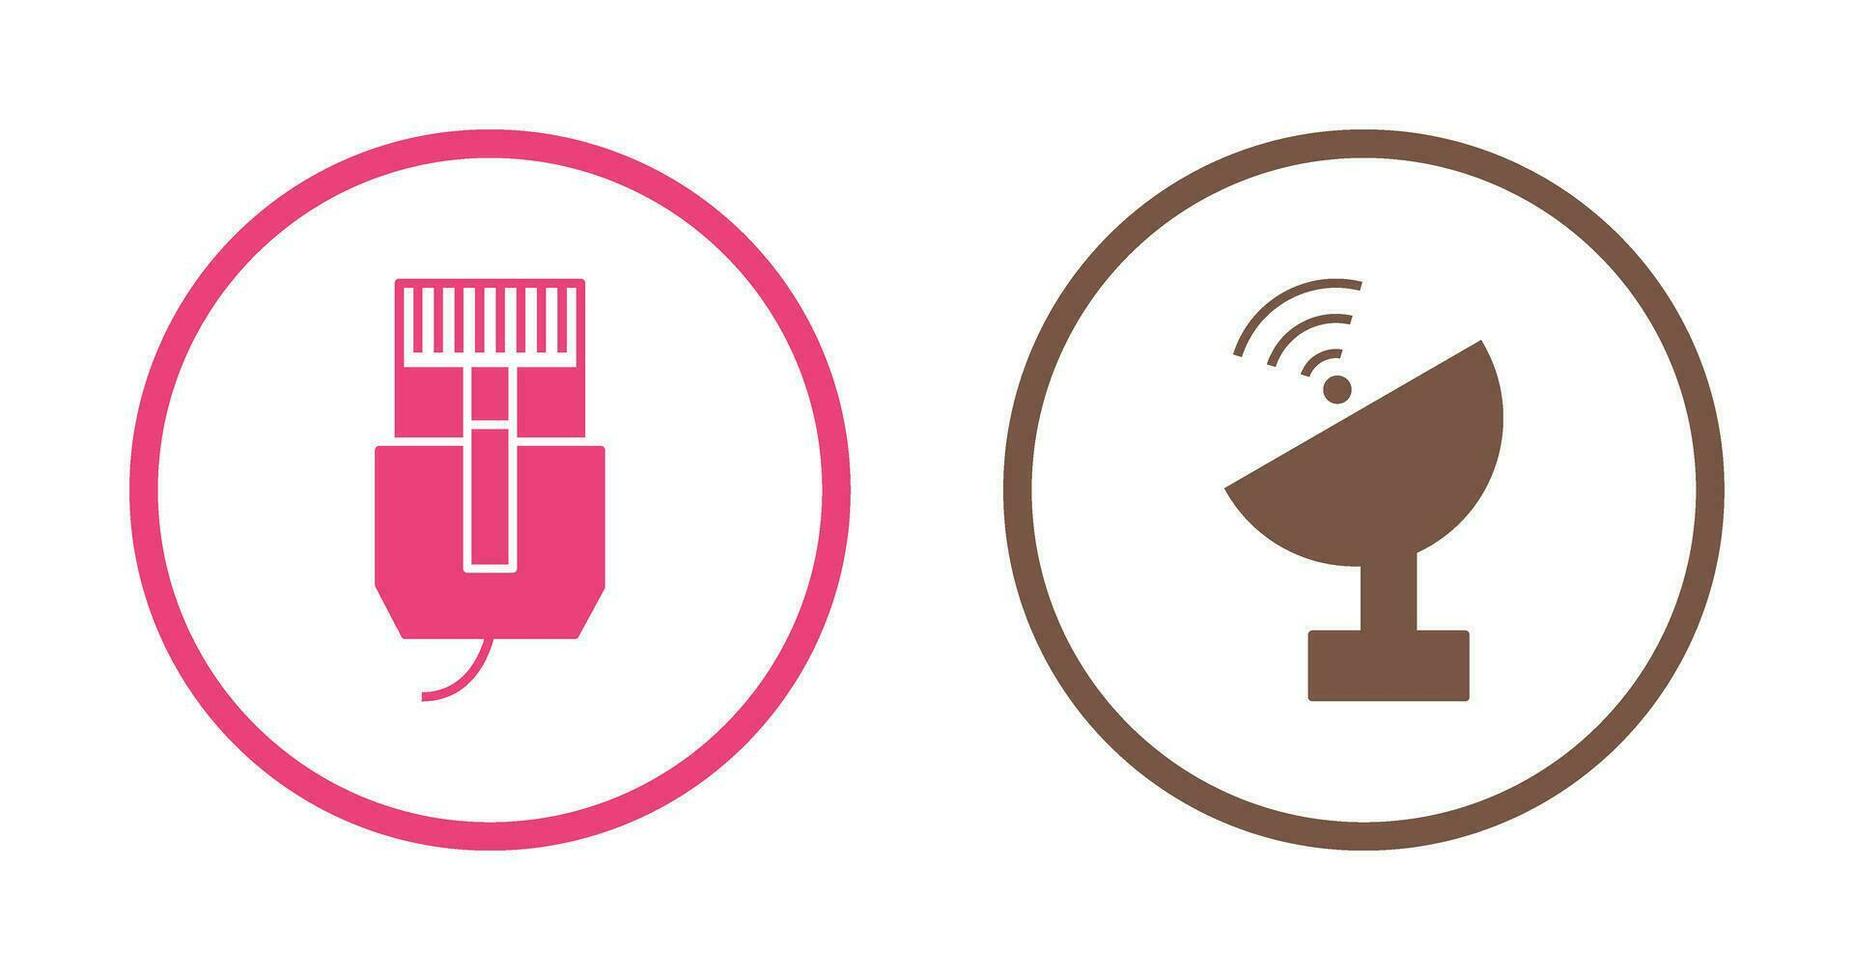 internet cable and satellite  Icon vector